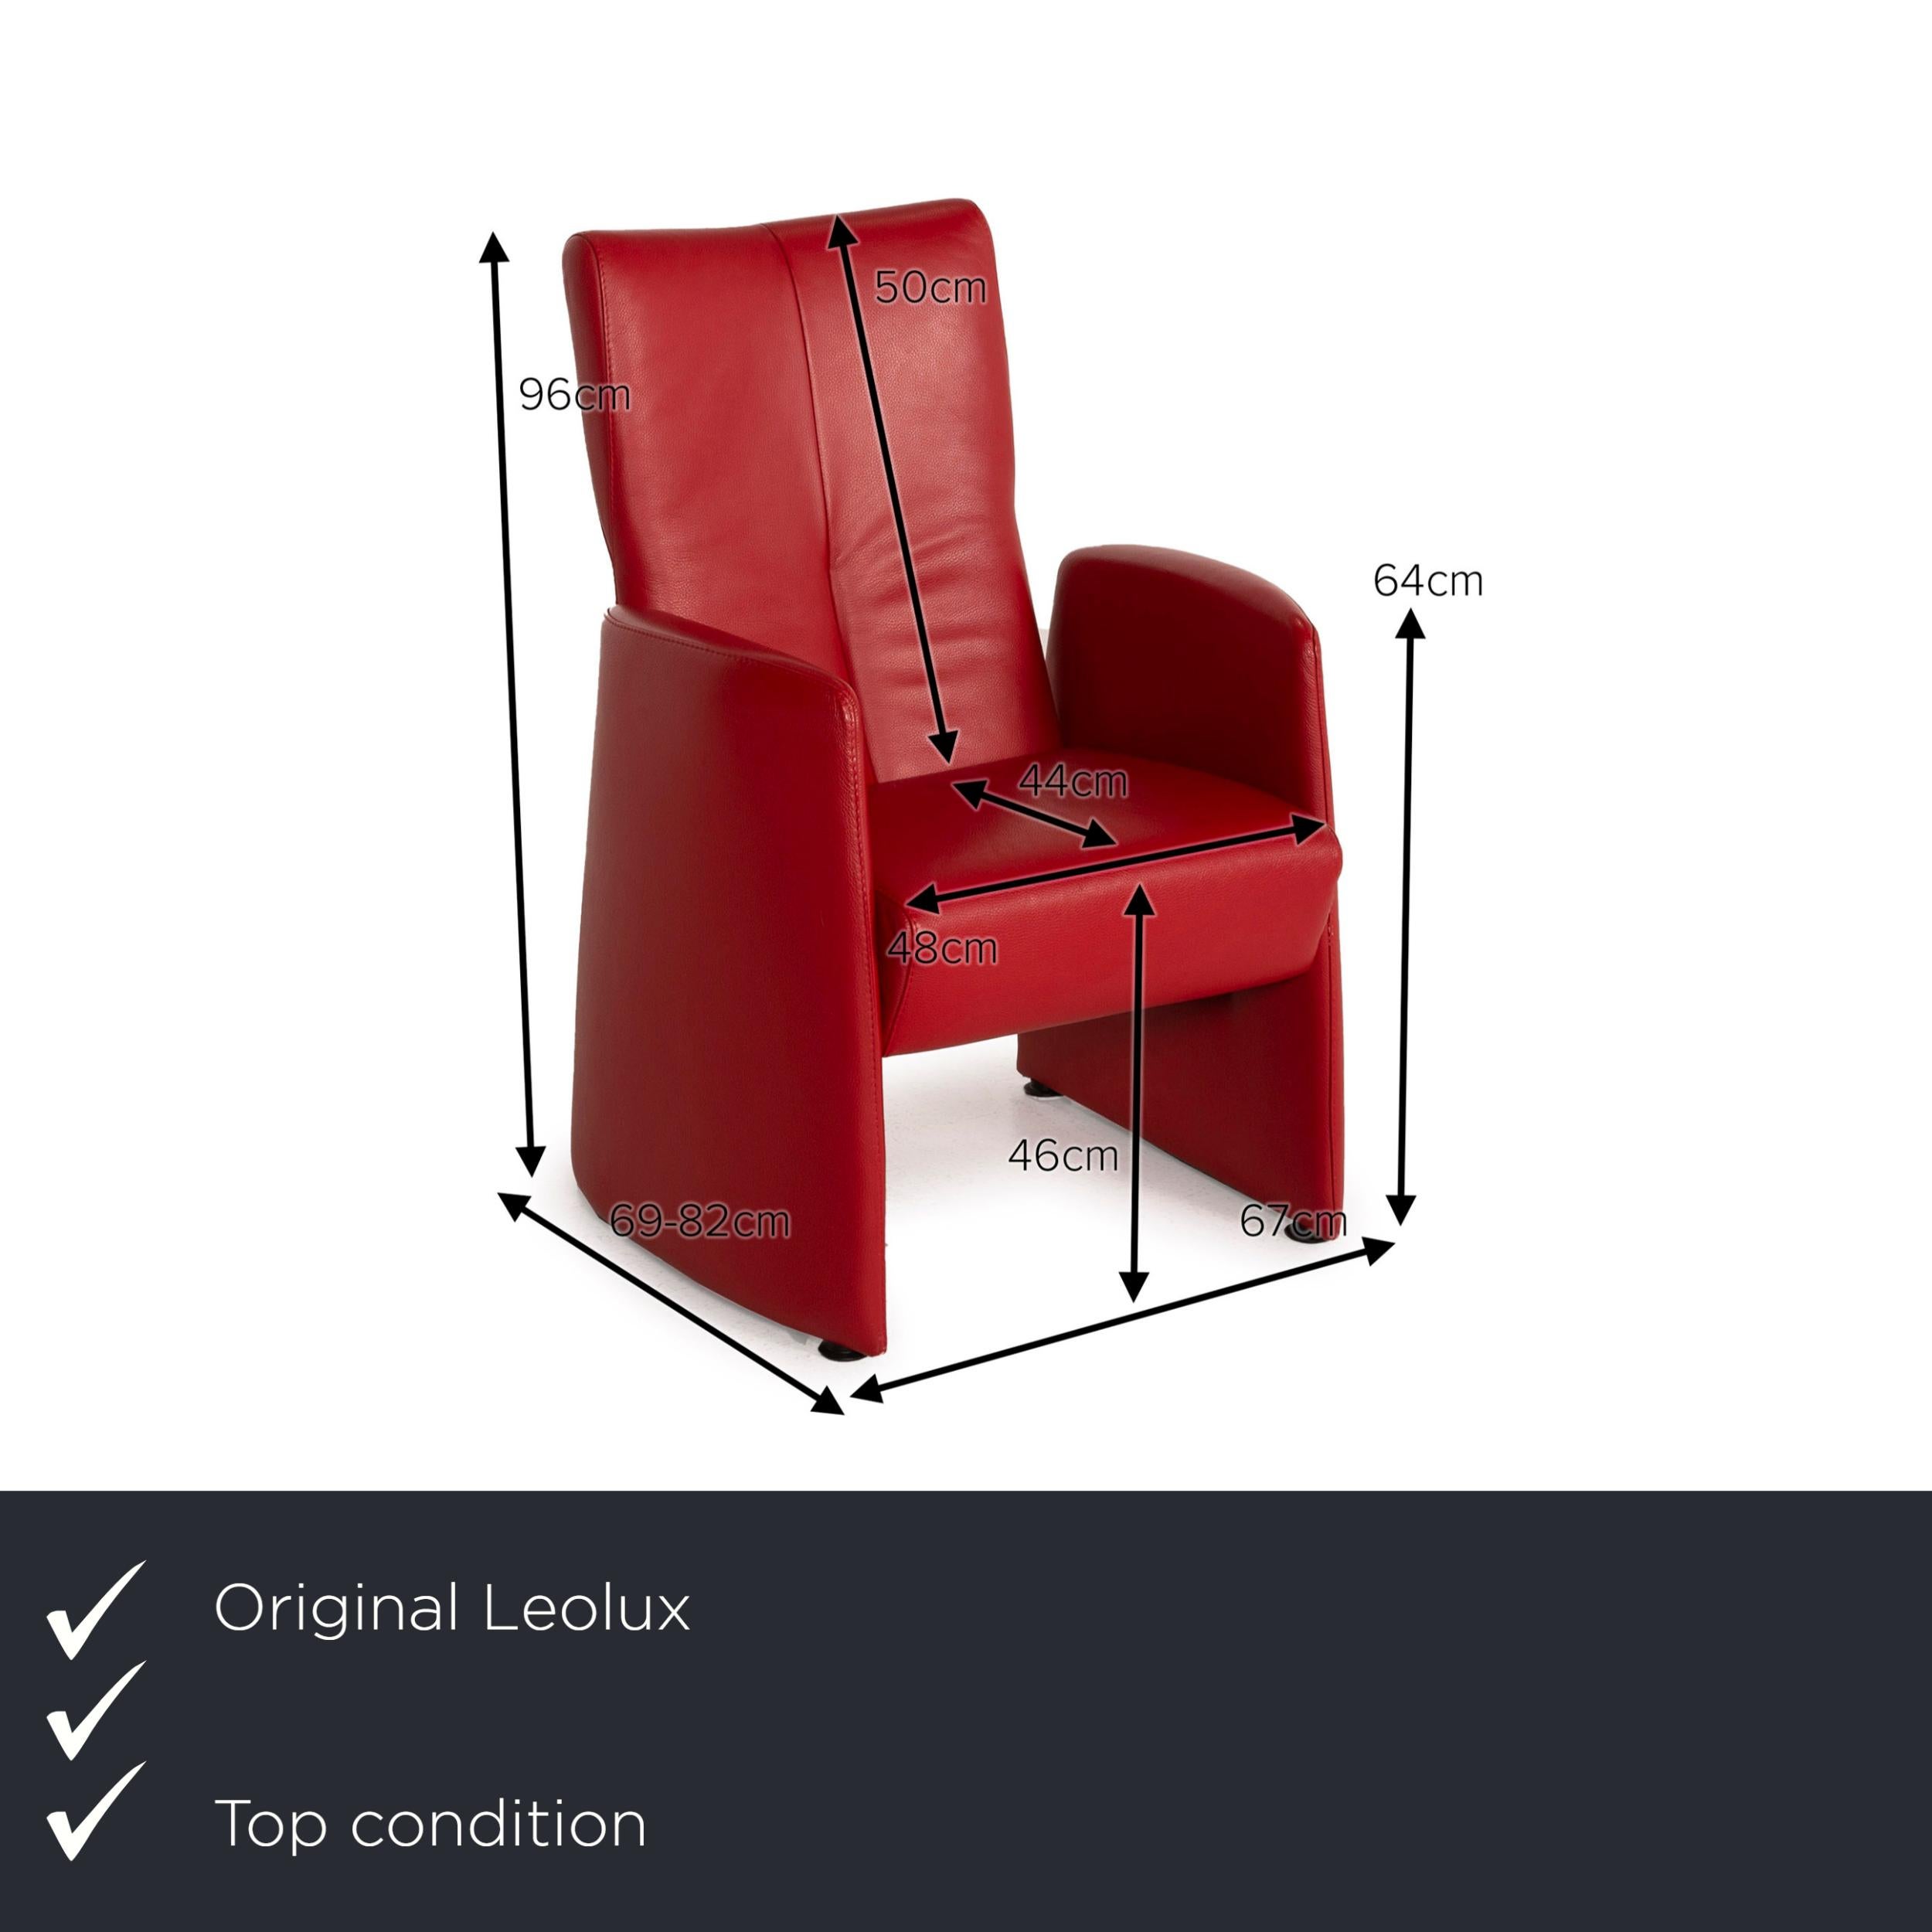 We present to you a Leolux leather armchair red relaxation function.
 

 Product measurements in centimeters:
 

Depth: 69
Width: 67
Height: 96
Seat height: 46
Rest height: 64
Seat depth: 44
Seat width: 48
Back height: 50.
 